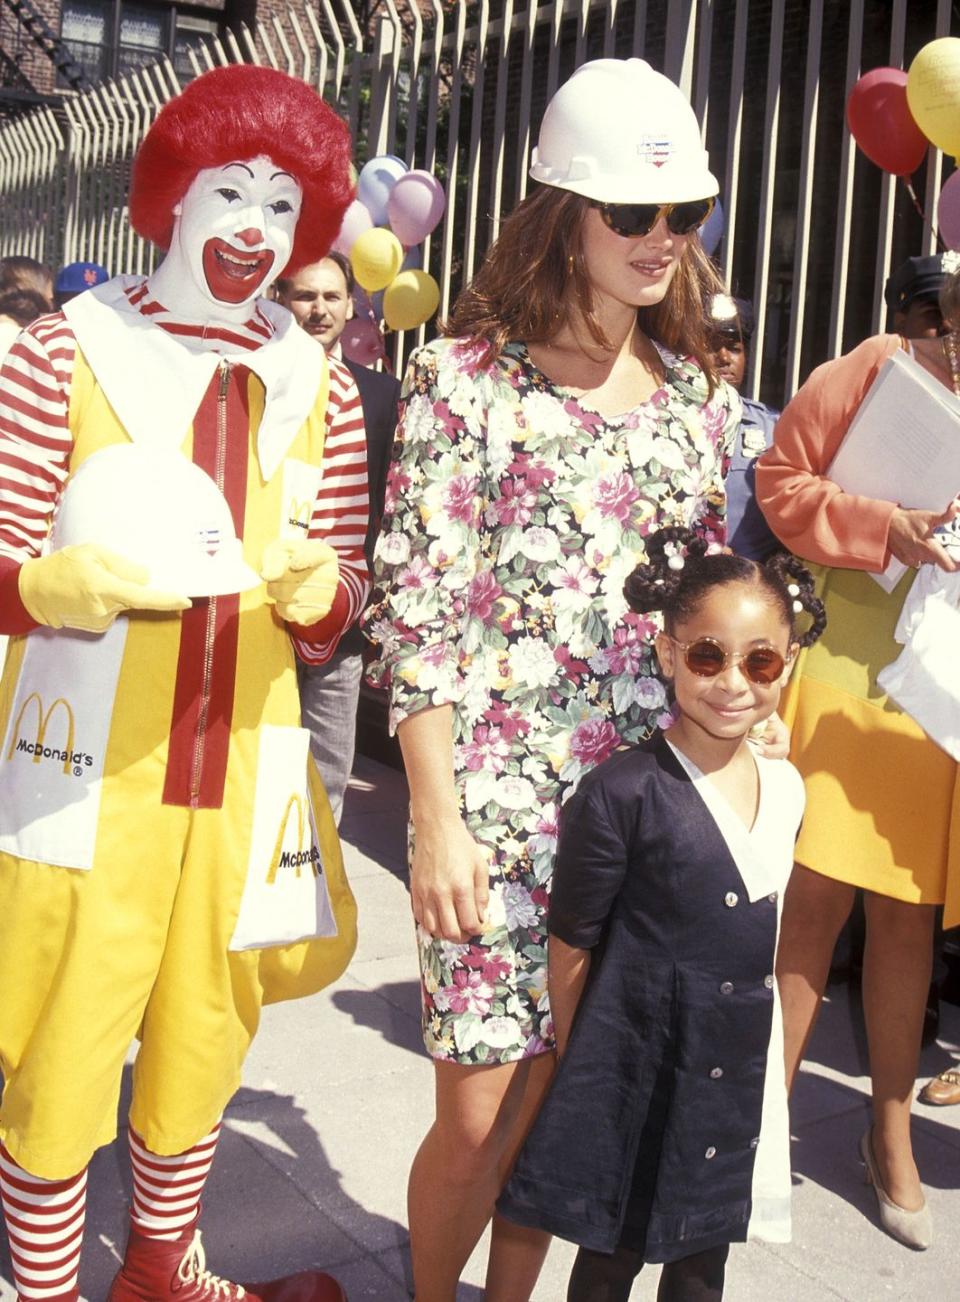 1992: Celebs At A "Helping Hands" Event